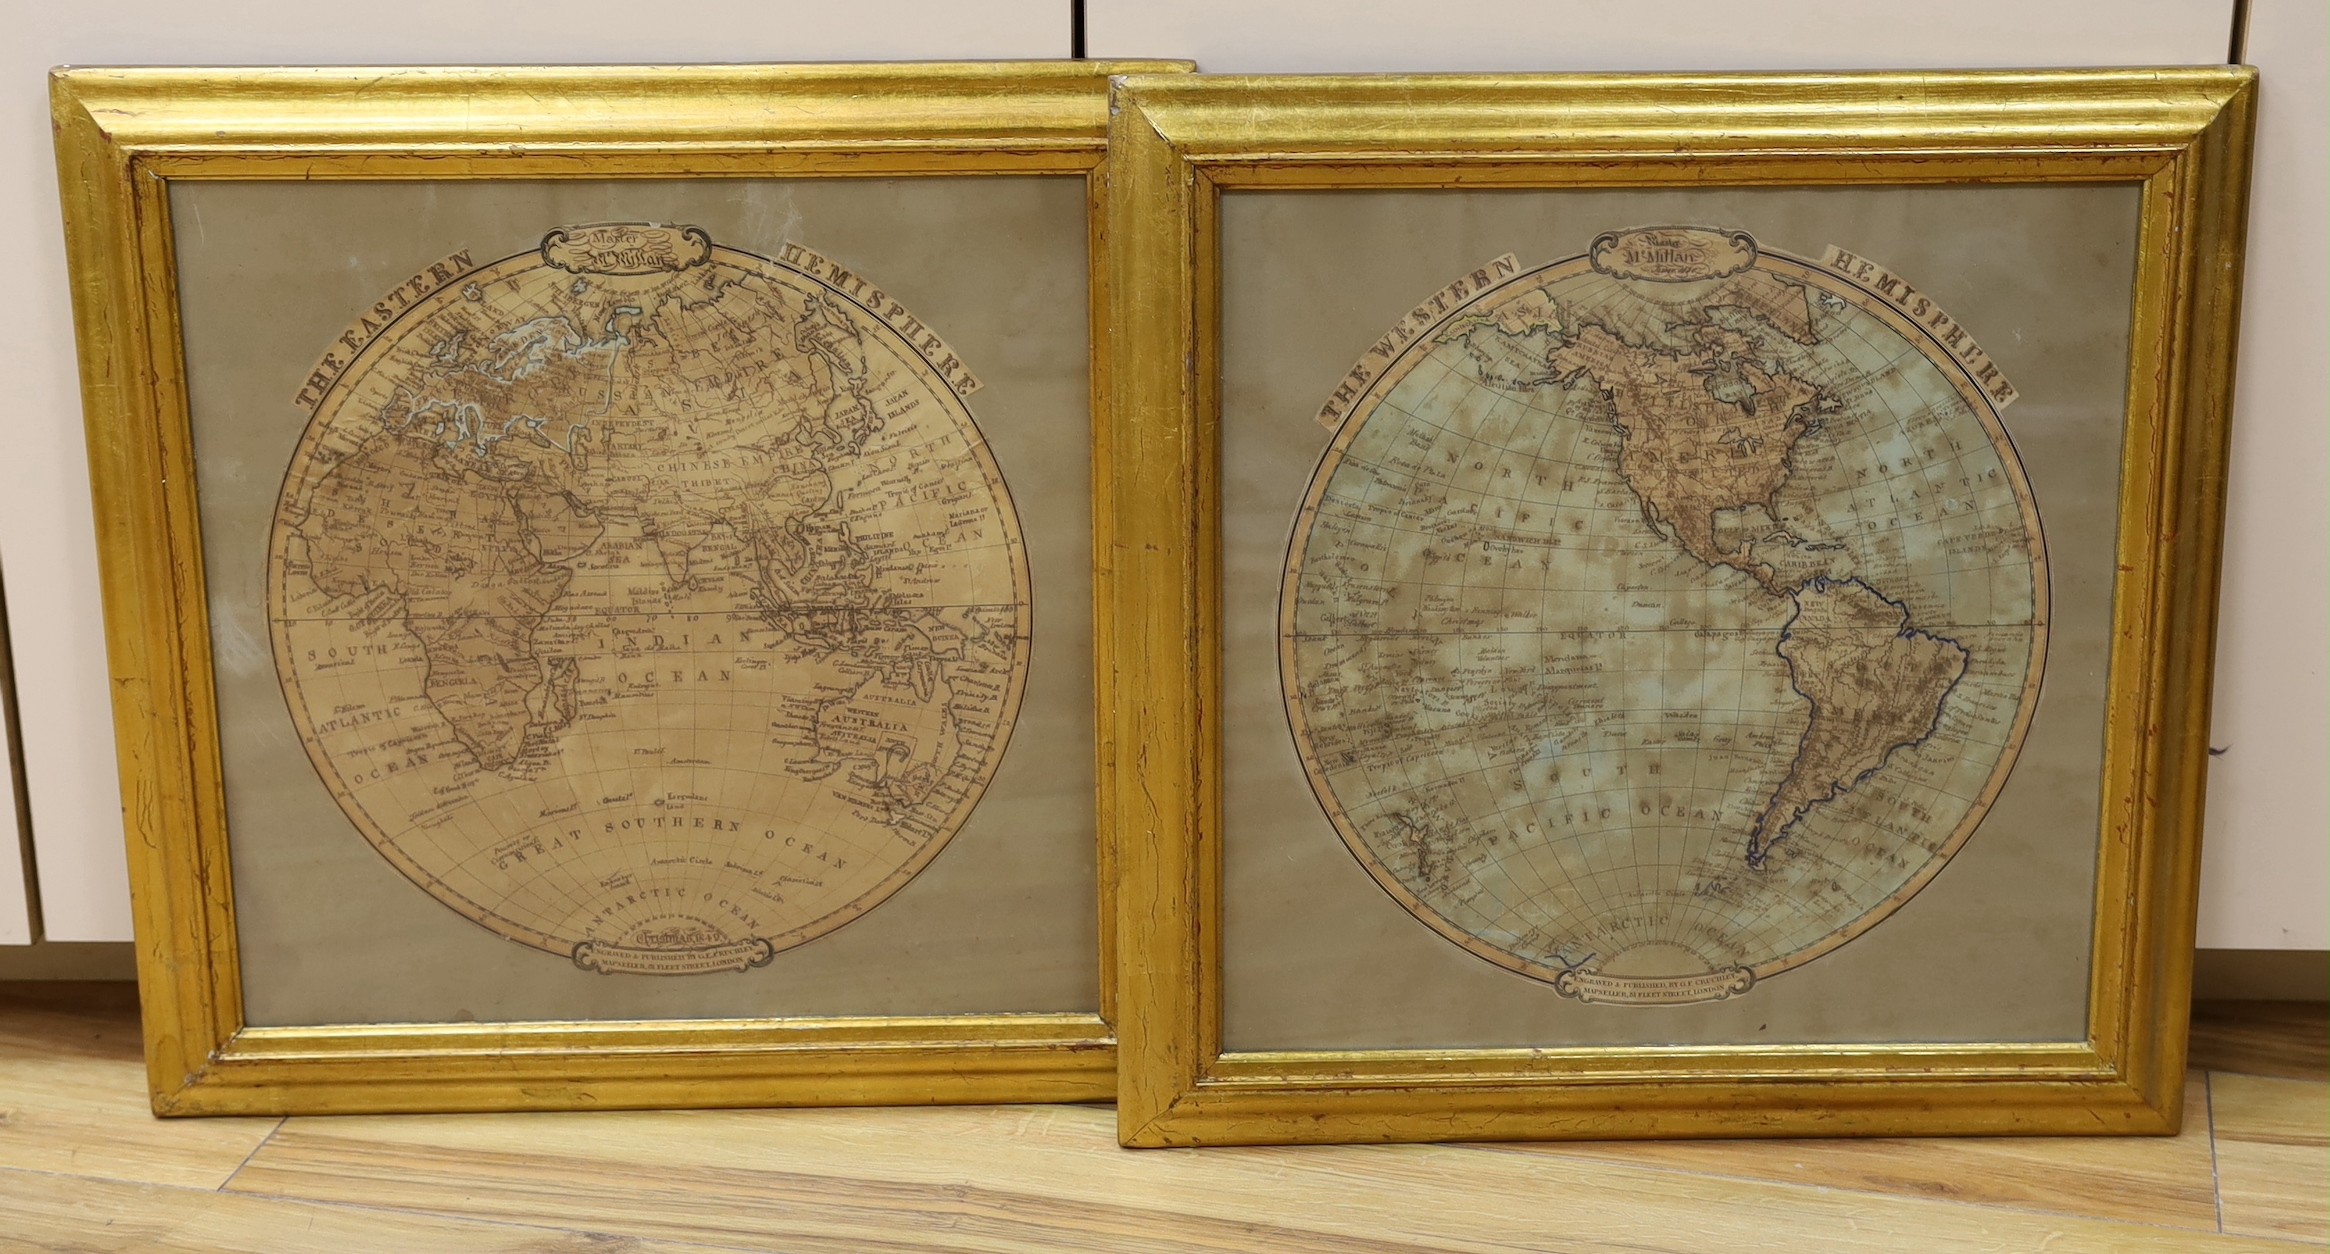 Master McMitlan 1850, pair of engraved maps of the Eastern and Western Hemisphere, published by Cruchley, and hand annotated by McMitlan, ships master, tondo, 36cm